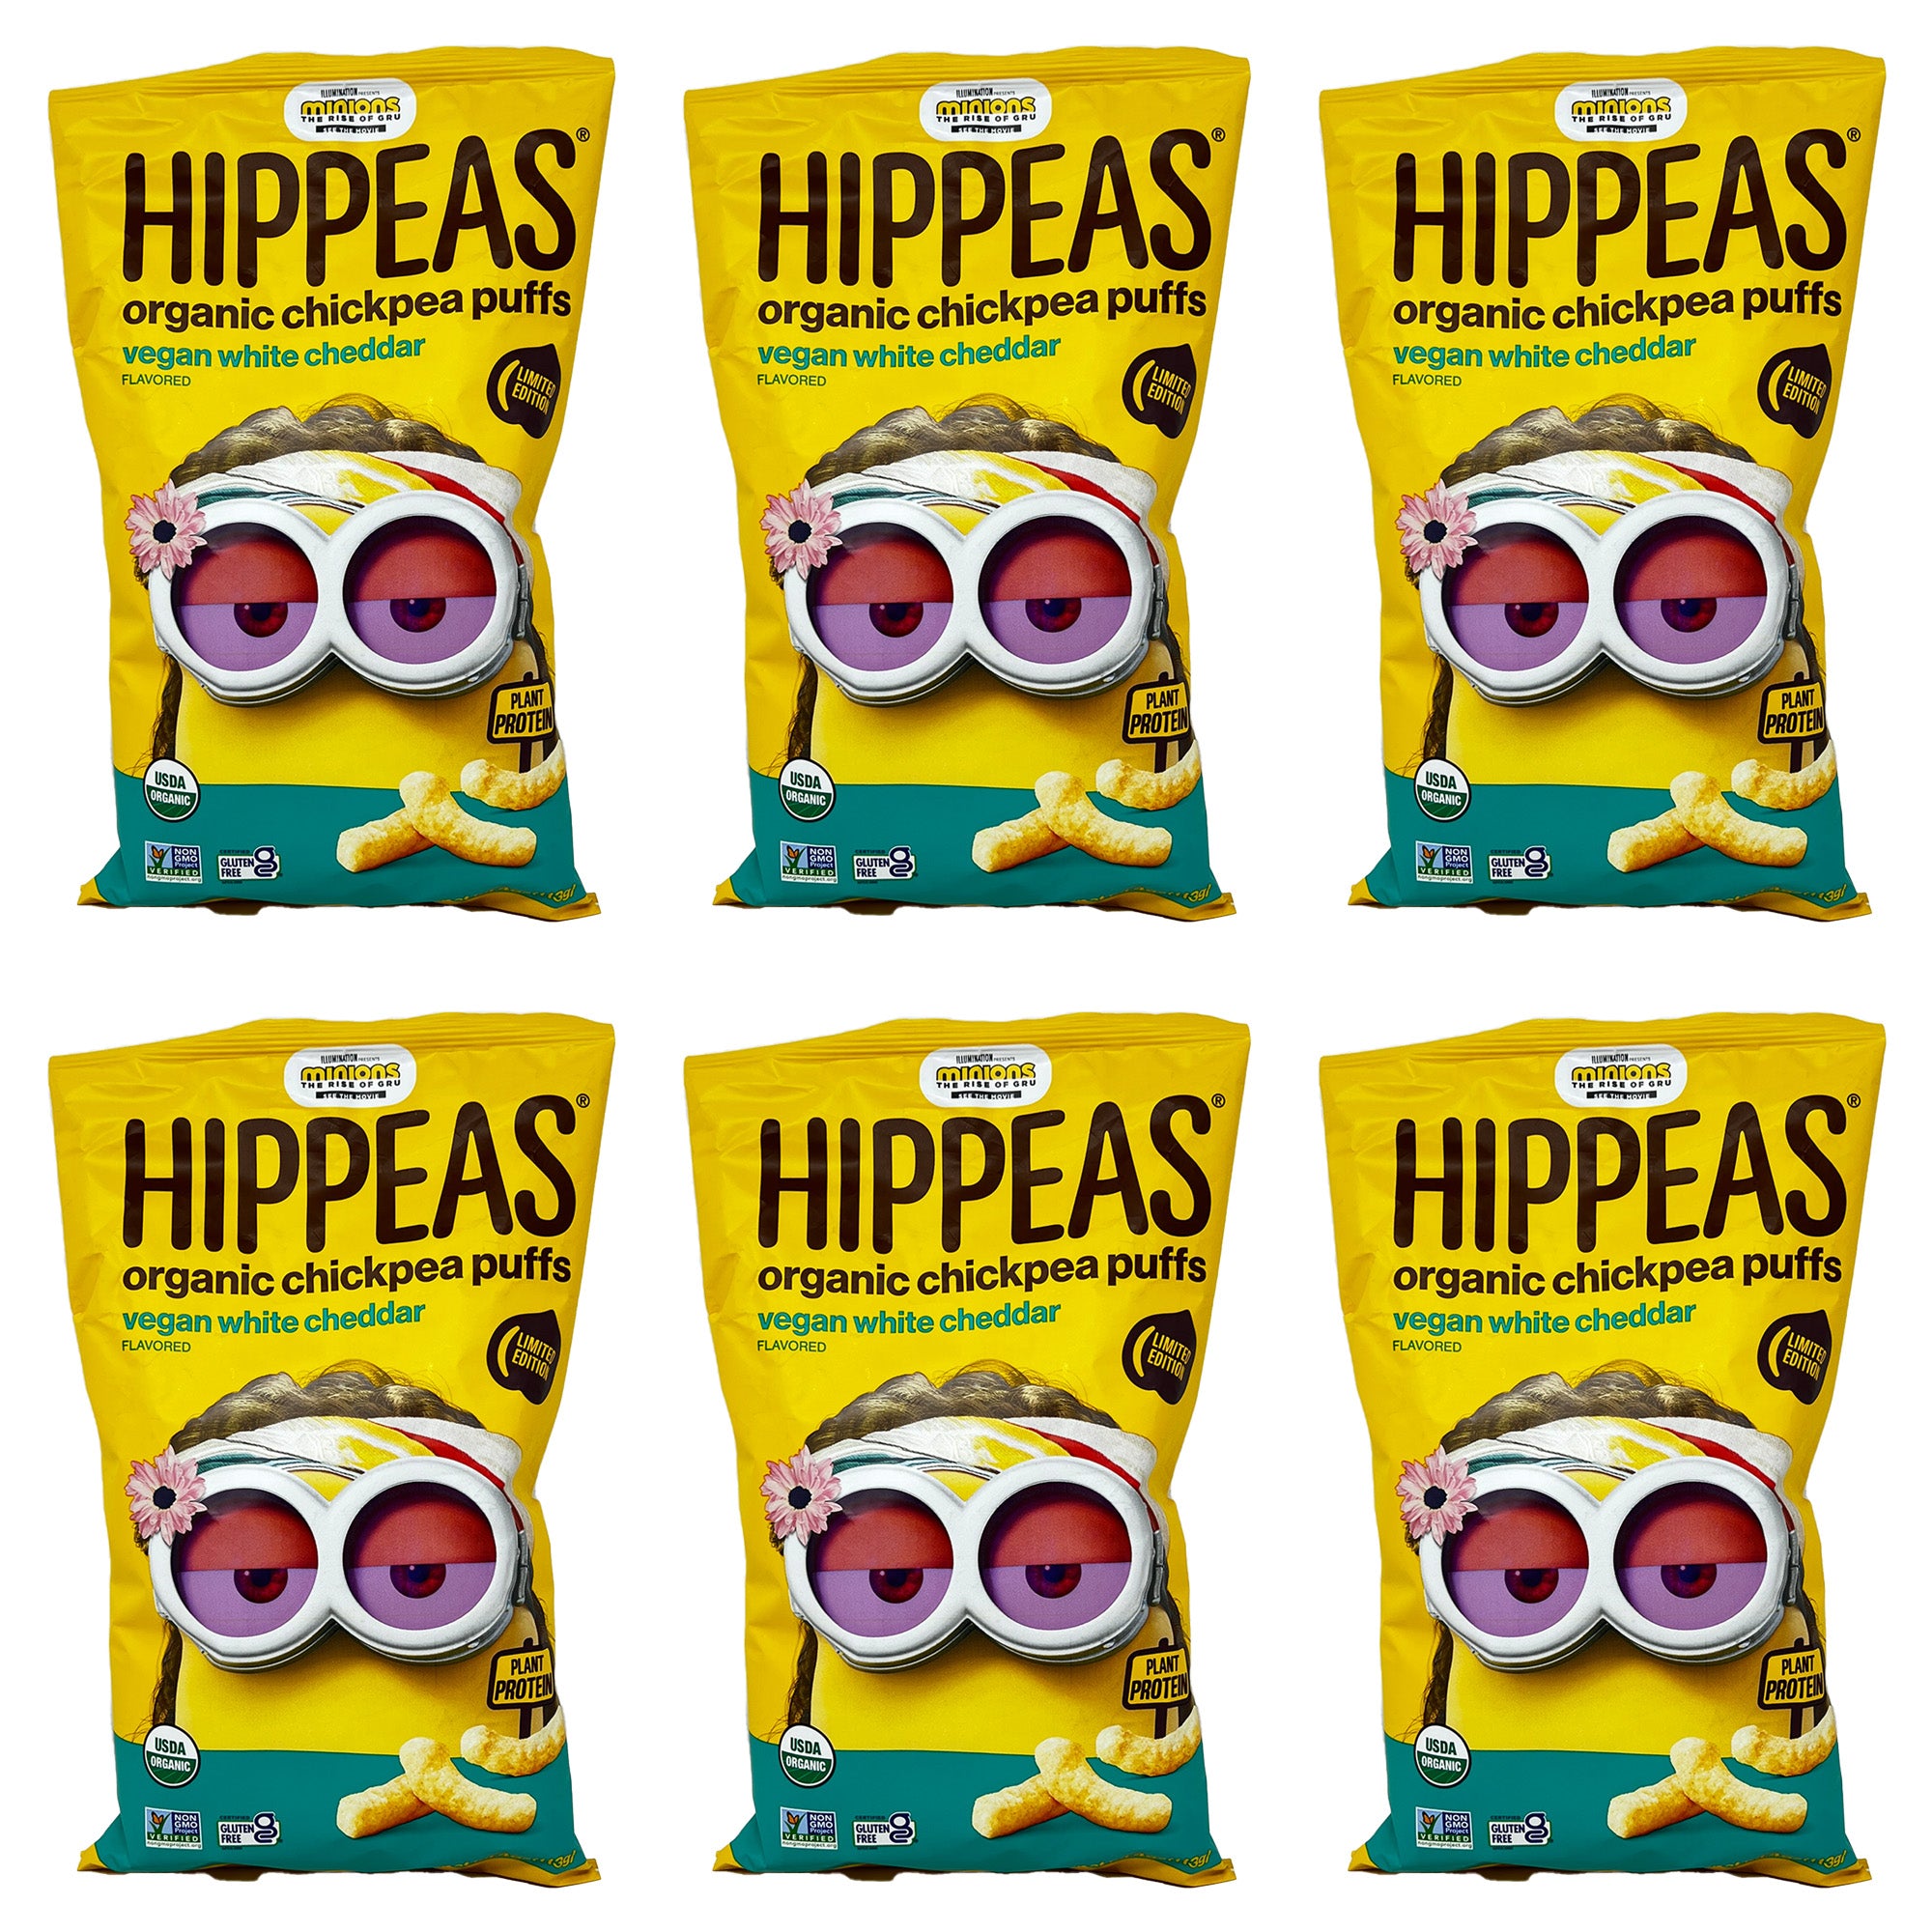 Hippeas Organic Chickpea Puffs, Limited Edition Minions: Rise of Gru, Vegan White Cheddar Flavored (6 Pack)